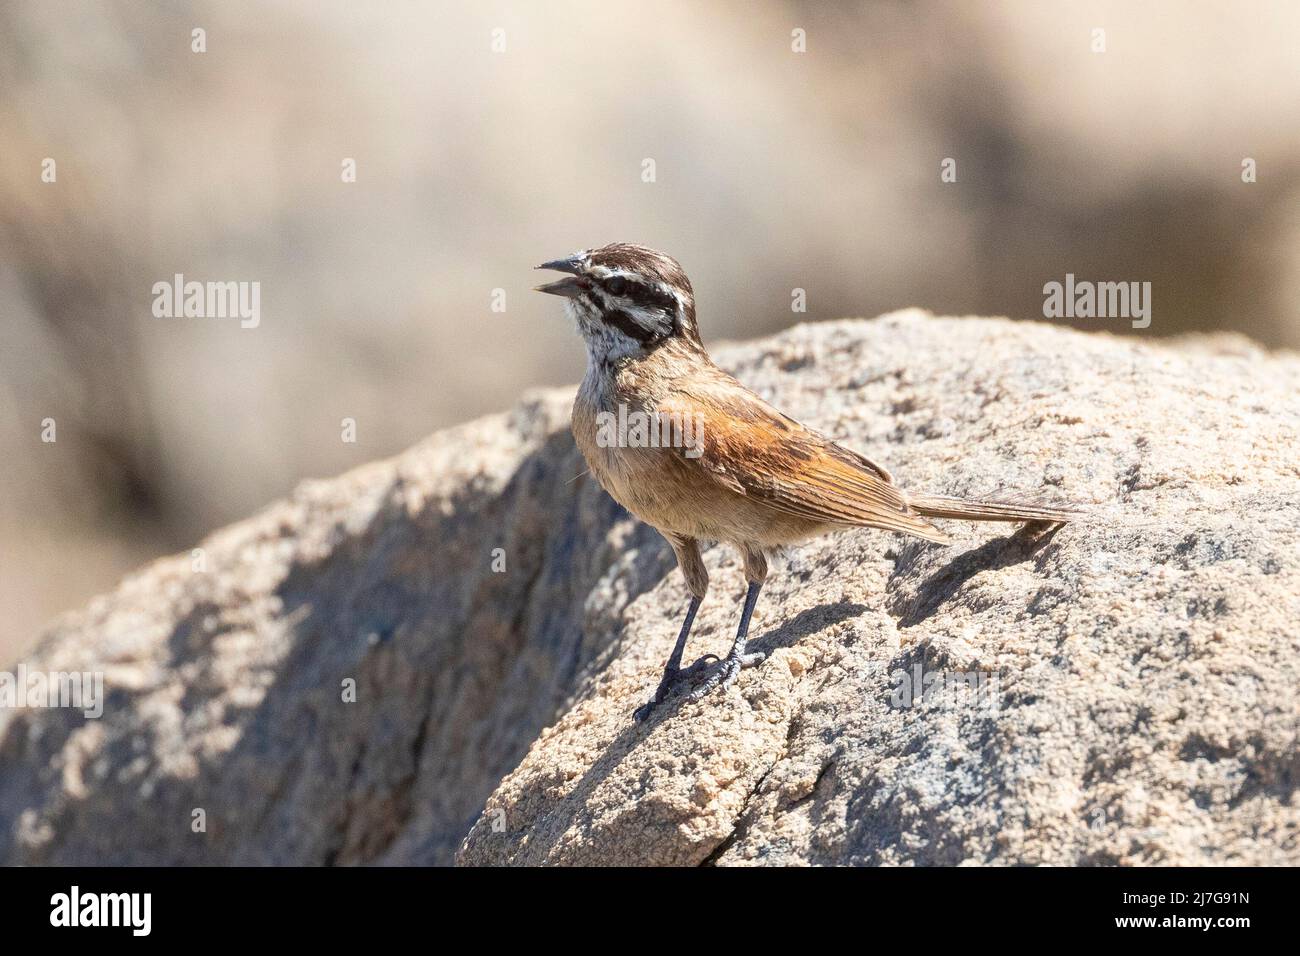 Cape Bunting (Emberiza capensis) at Augrabies Falls, Northern Cape, South Africa Stock Photo